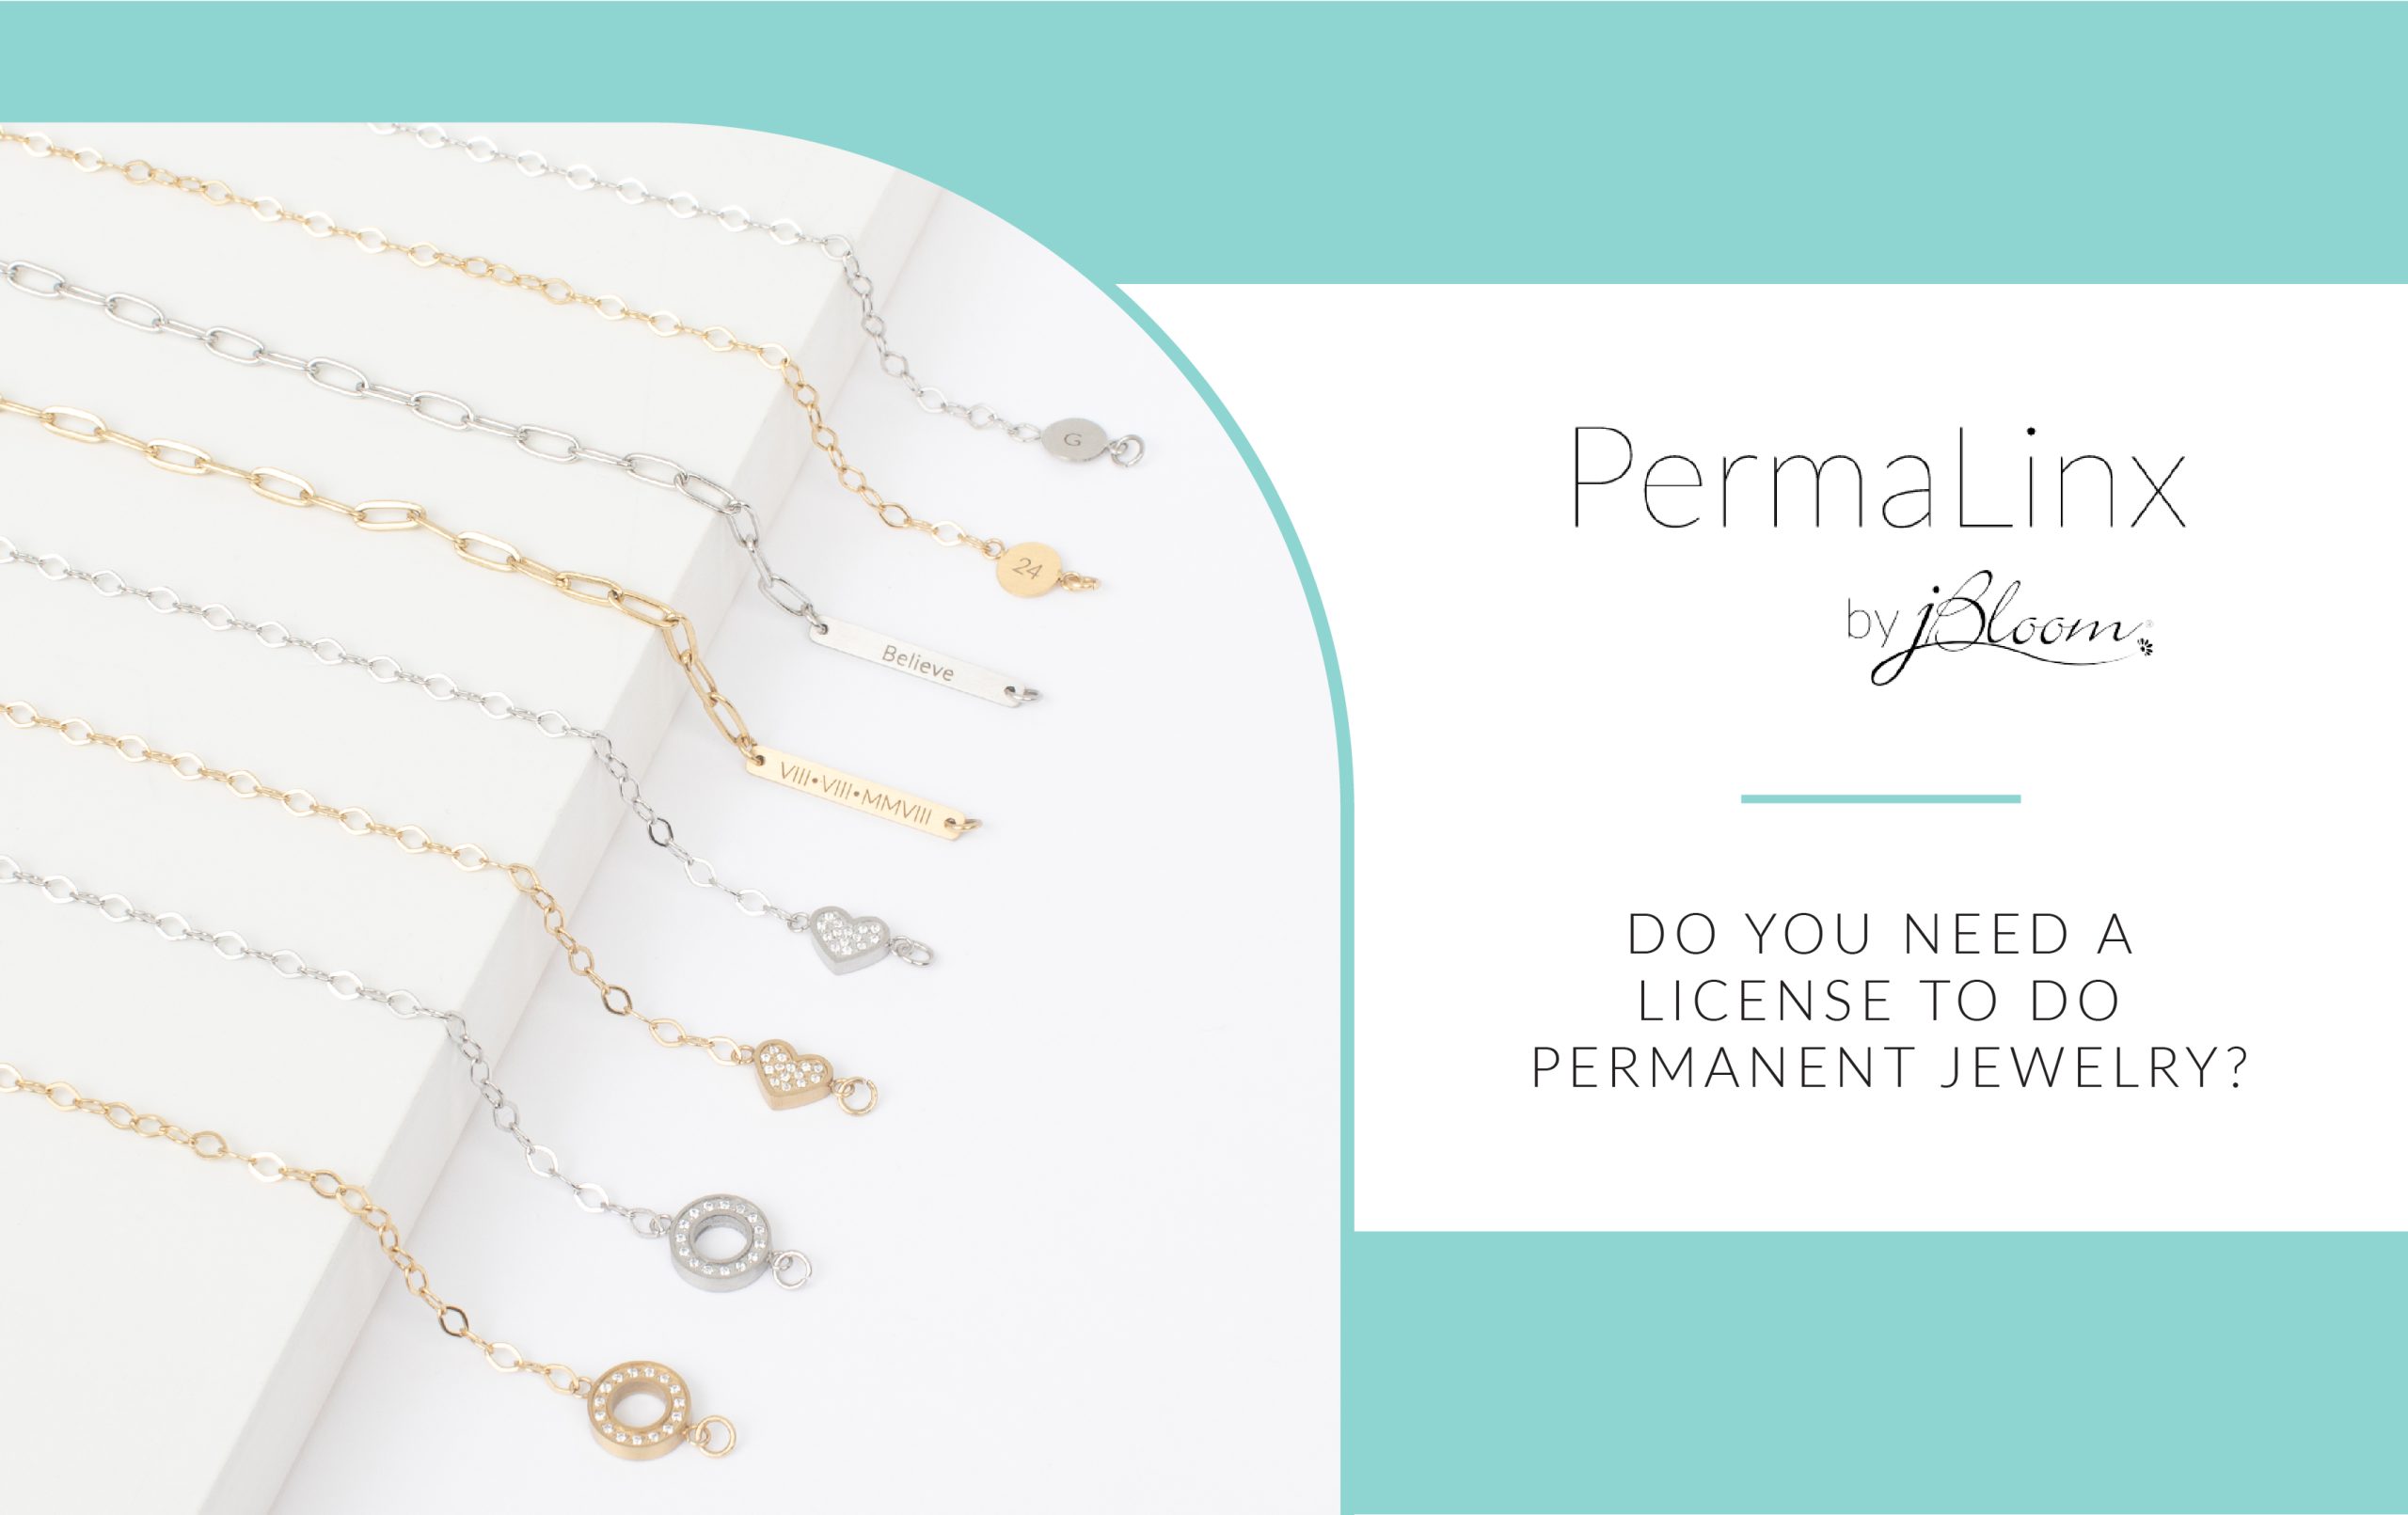 Our permanent jewelry starter kit is the best